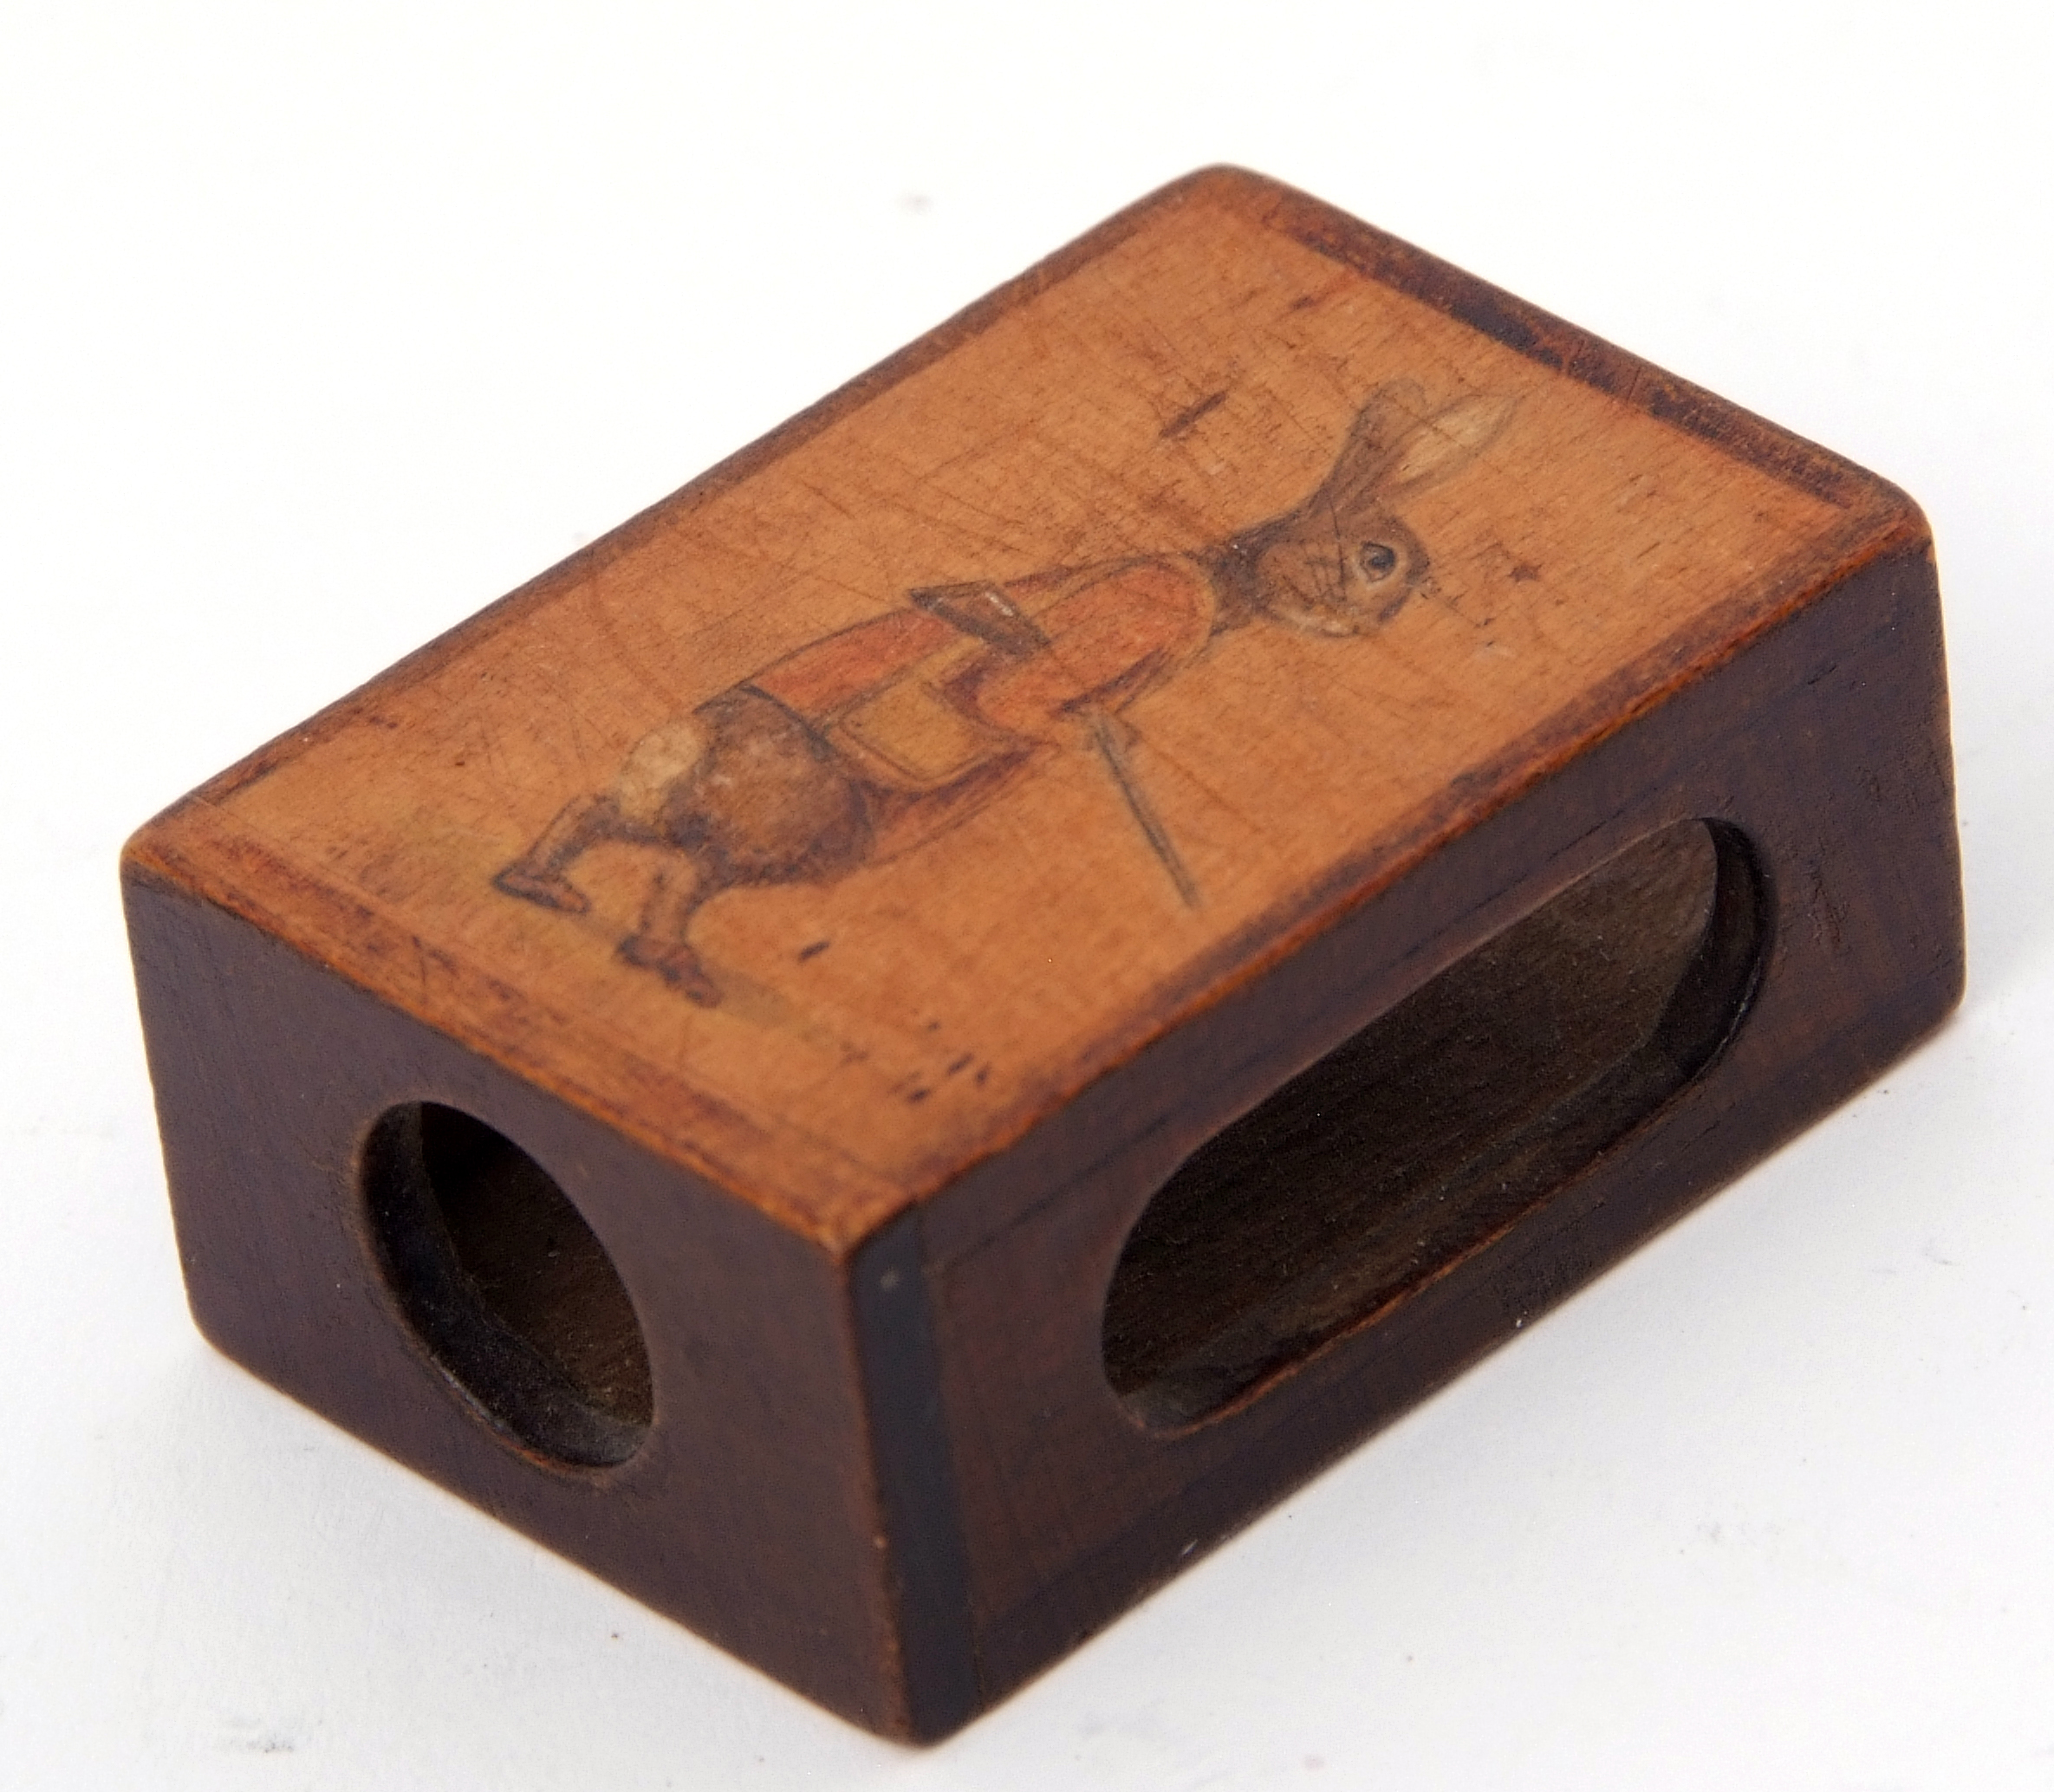 Early 20th century treen matchbox holder, the front painted with an image of a gamekeeper rabbit - Image 2 of 2